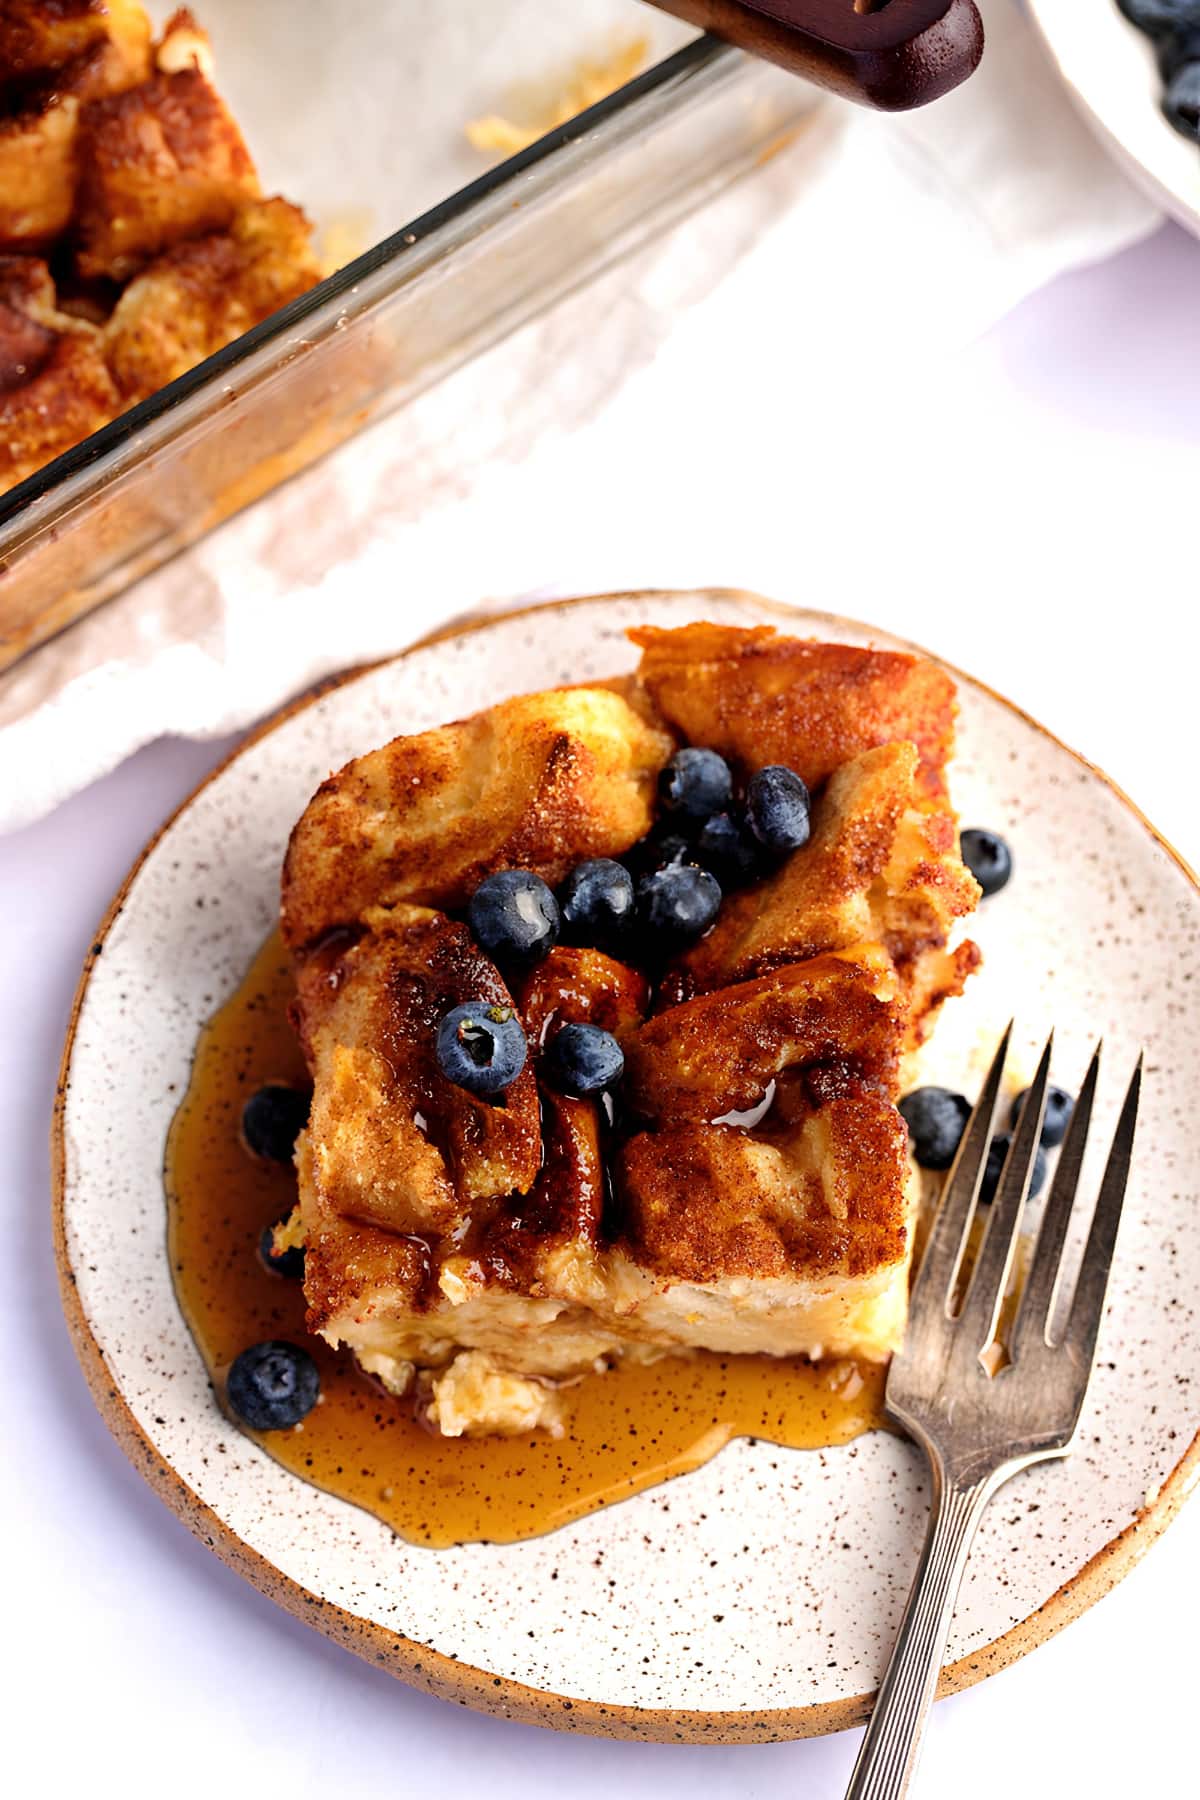 Crunchy and Custardy Sliced French Toast with Blueberries